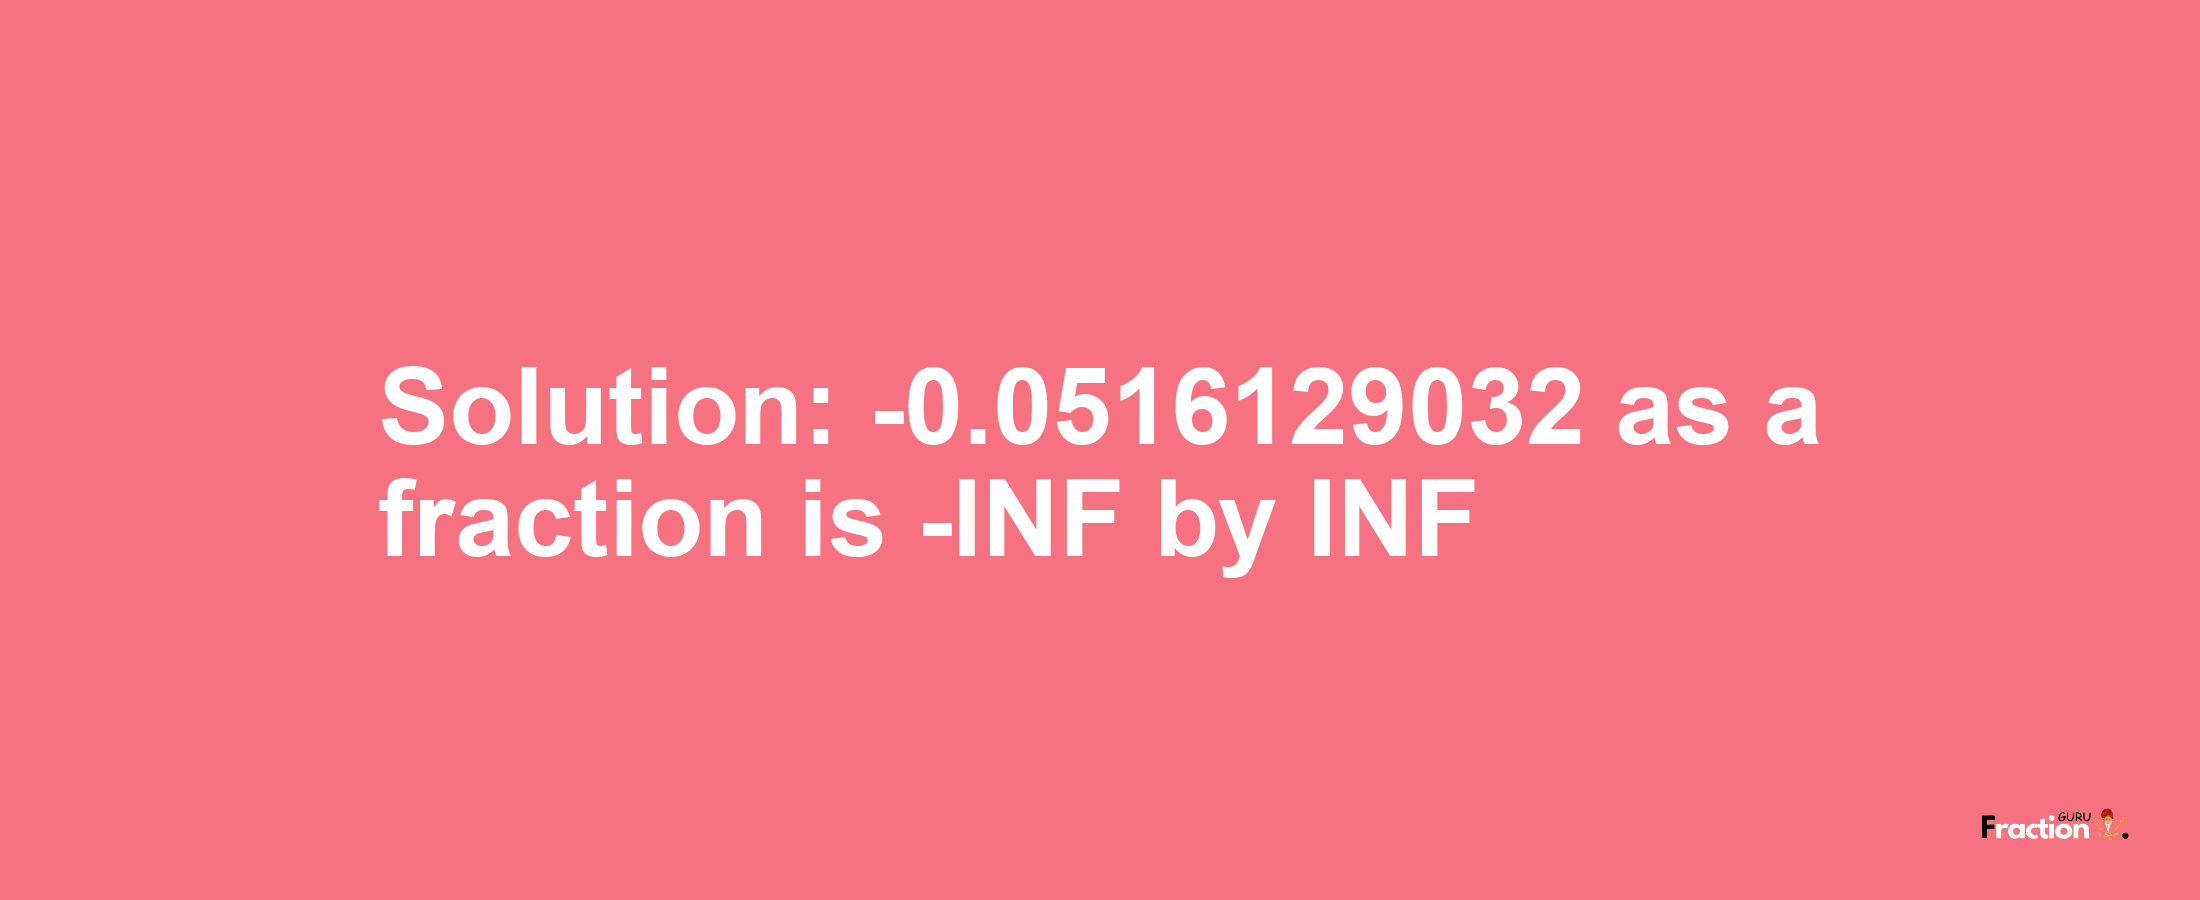 Solution:-0.0516129032 as a fraction is -INF/INF